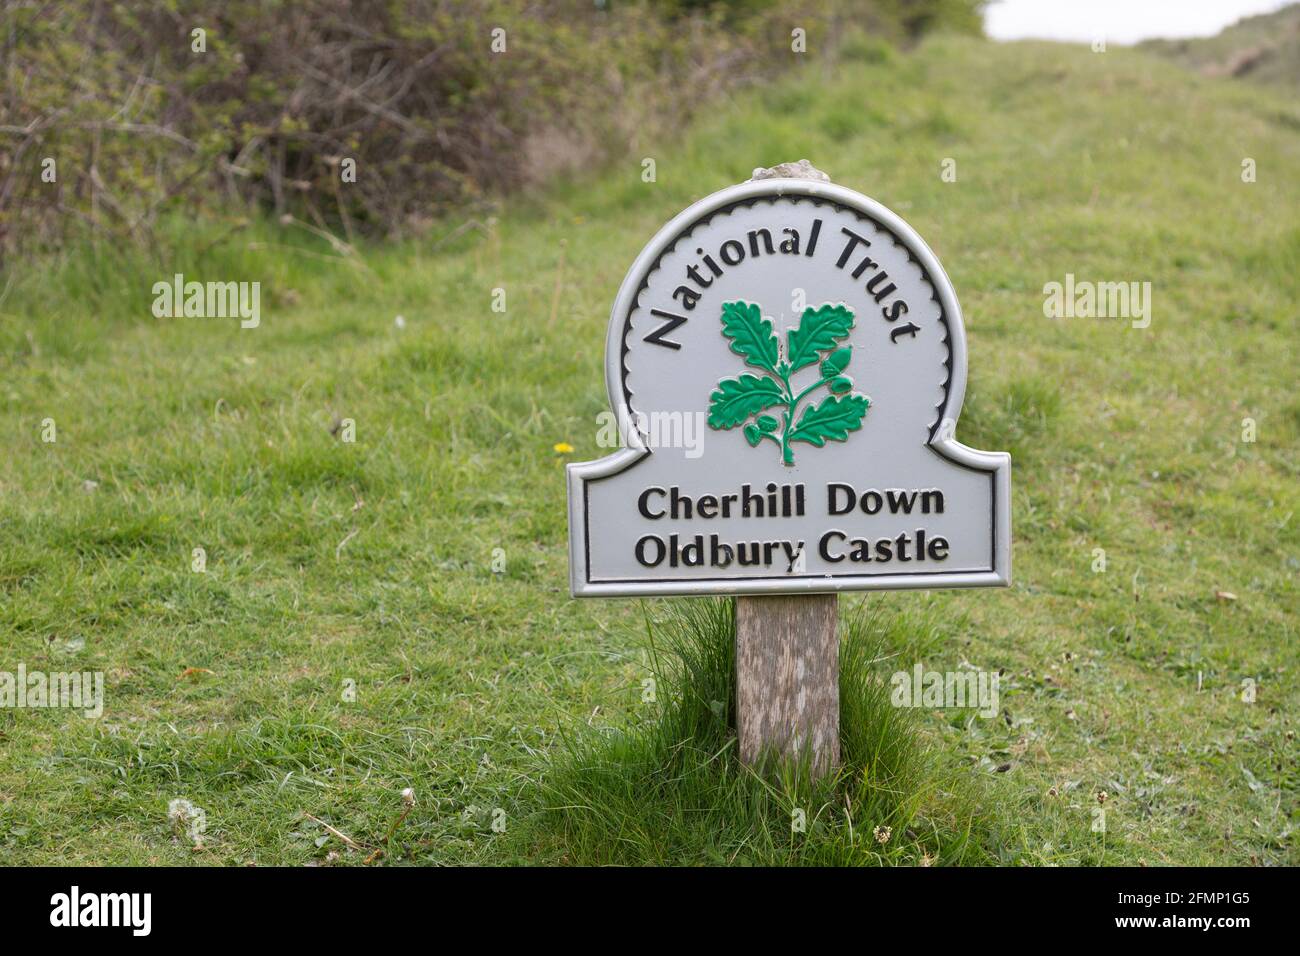 National Trust sign for Cherhill Down and Oldbury Castle, Wiltshire, England, UK Stock Photo